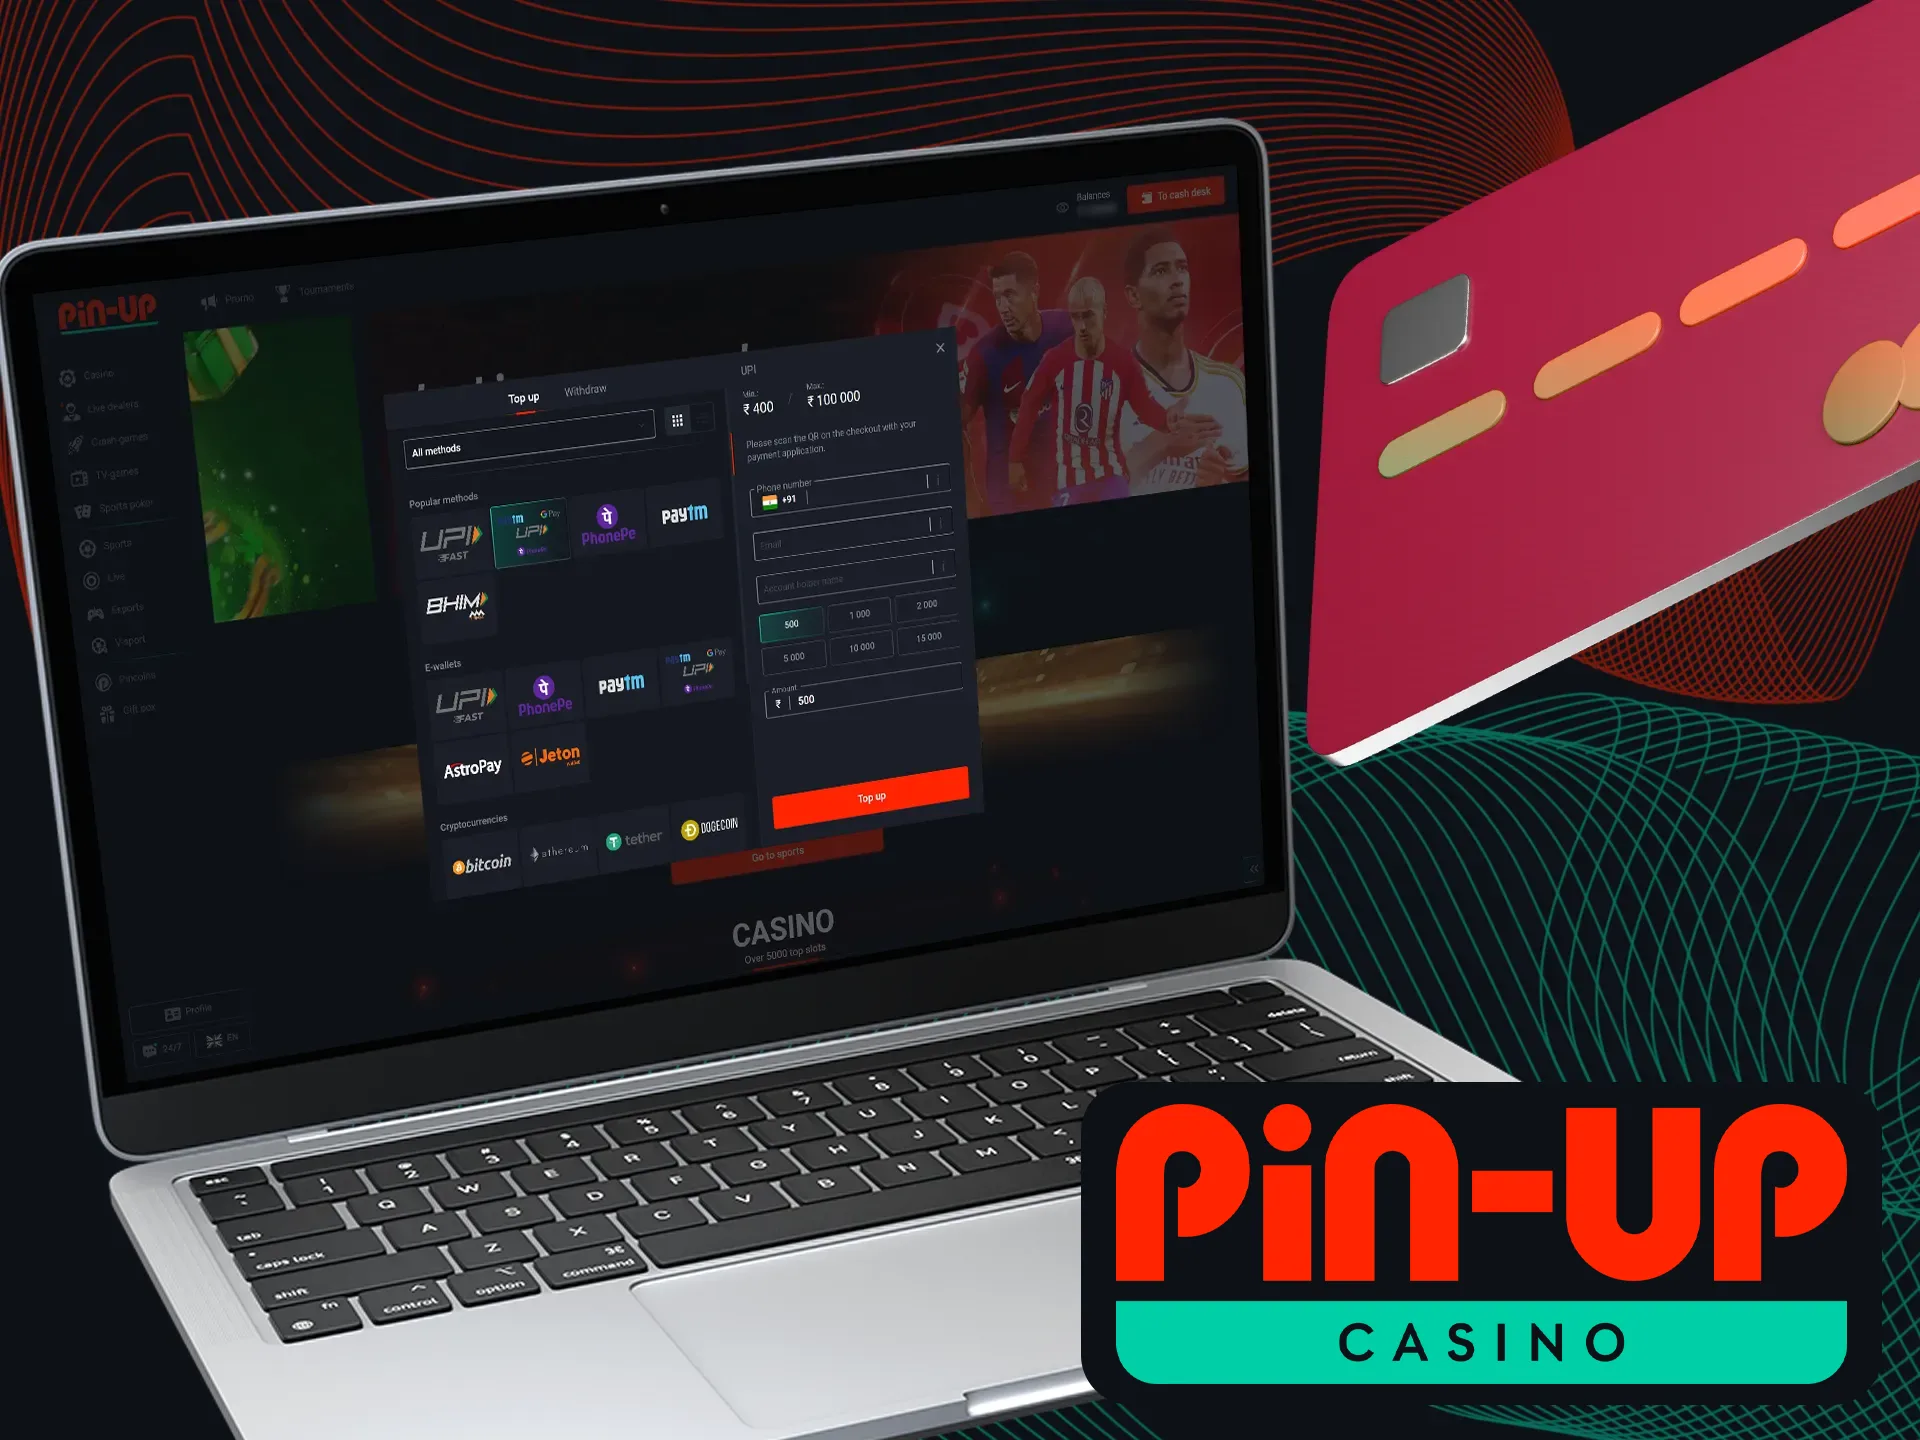 Here you can explore the deposit and withdrawal methods available at Pin-Up Casino.